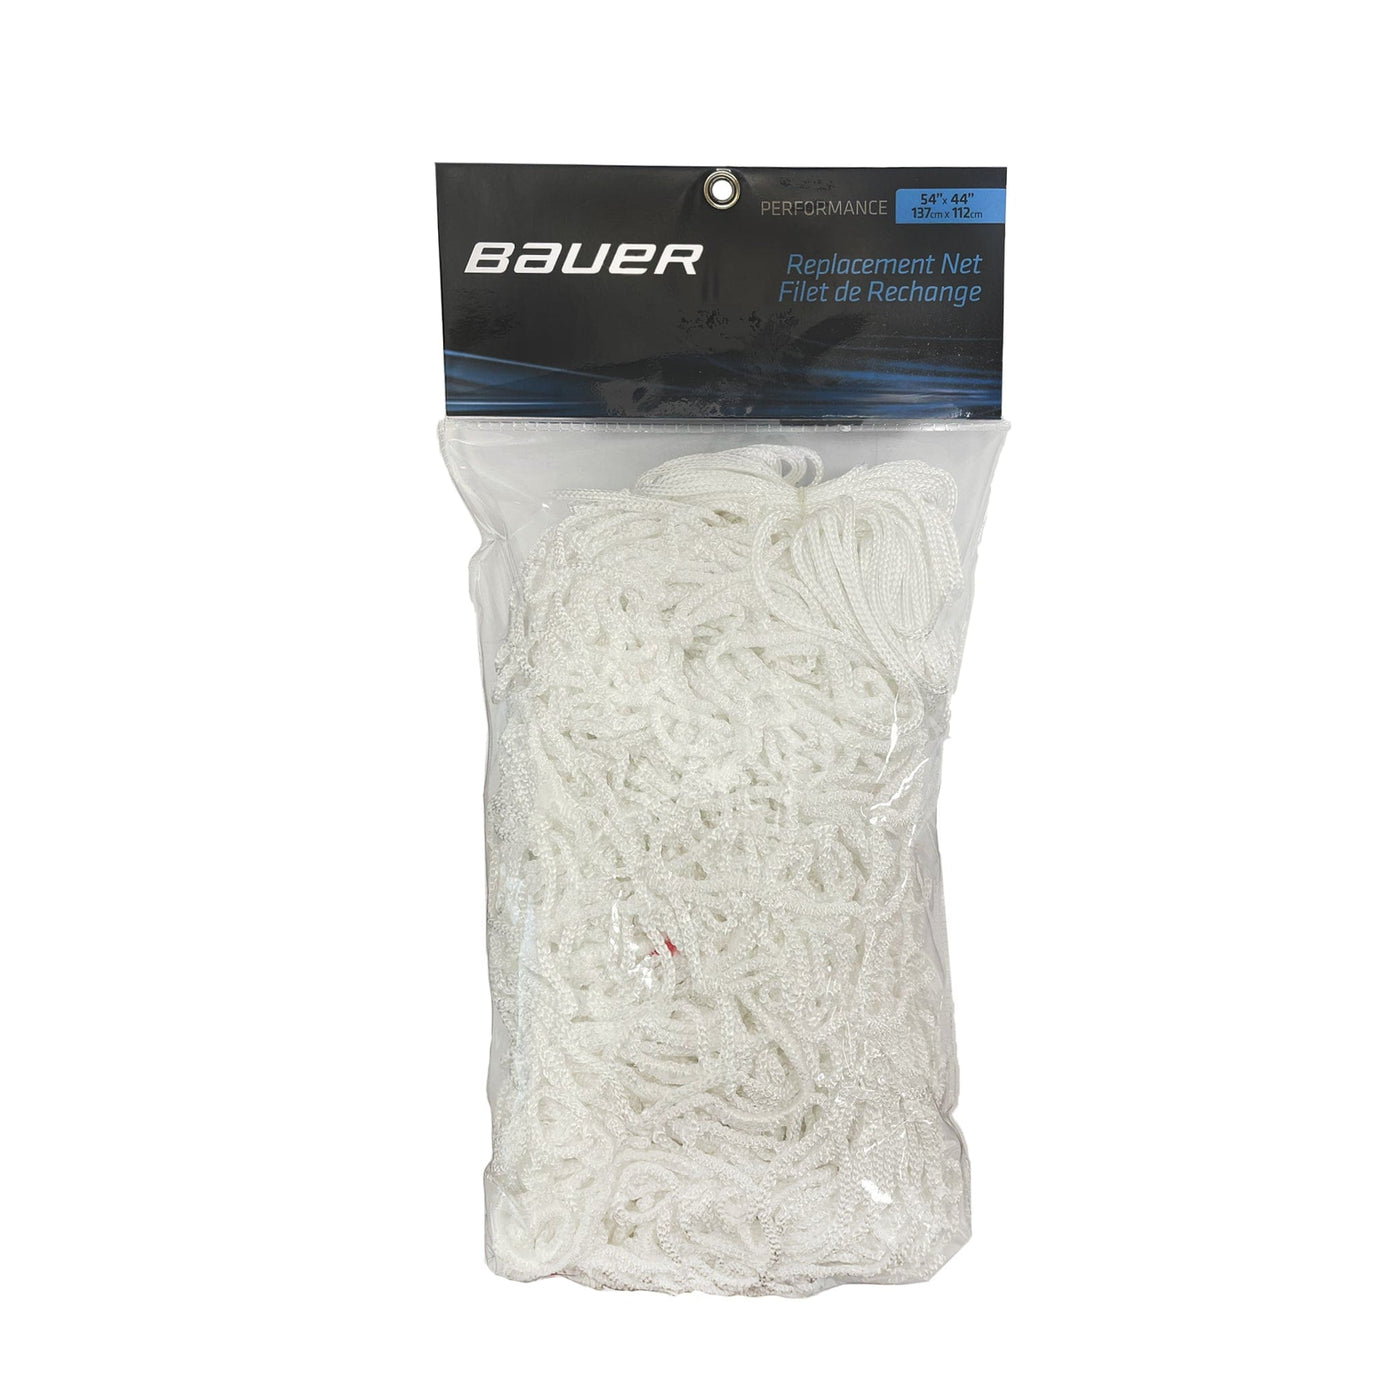 Bauer Performance Replacement Hockey Netting - The Hockey Shop Source For Sports